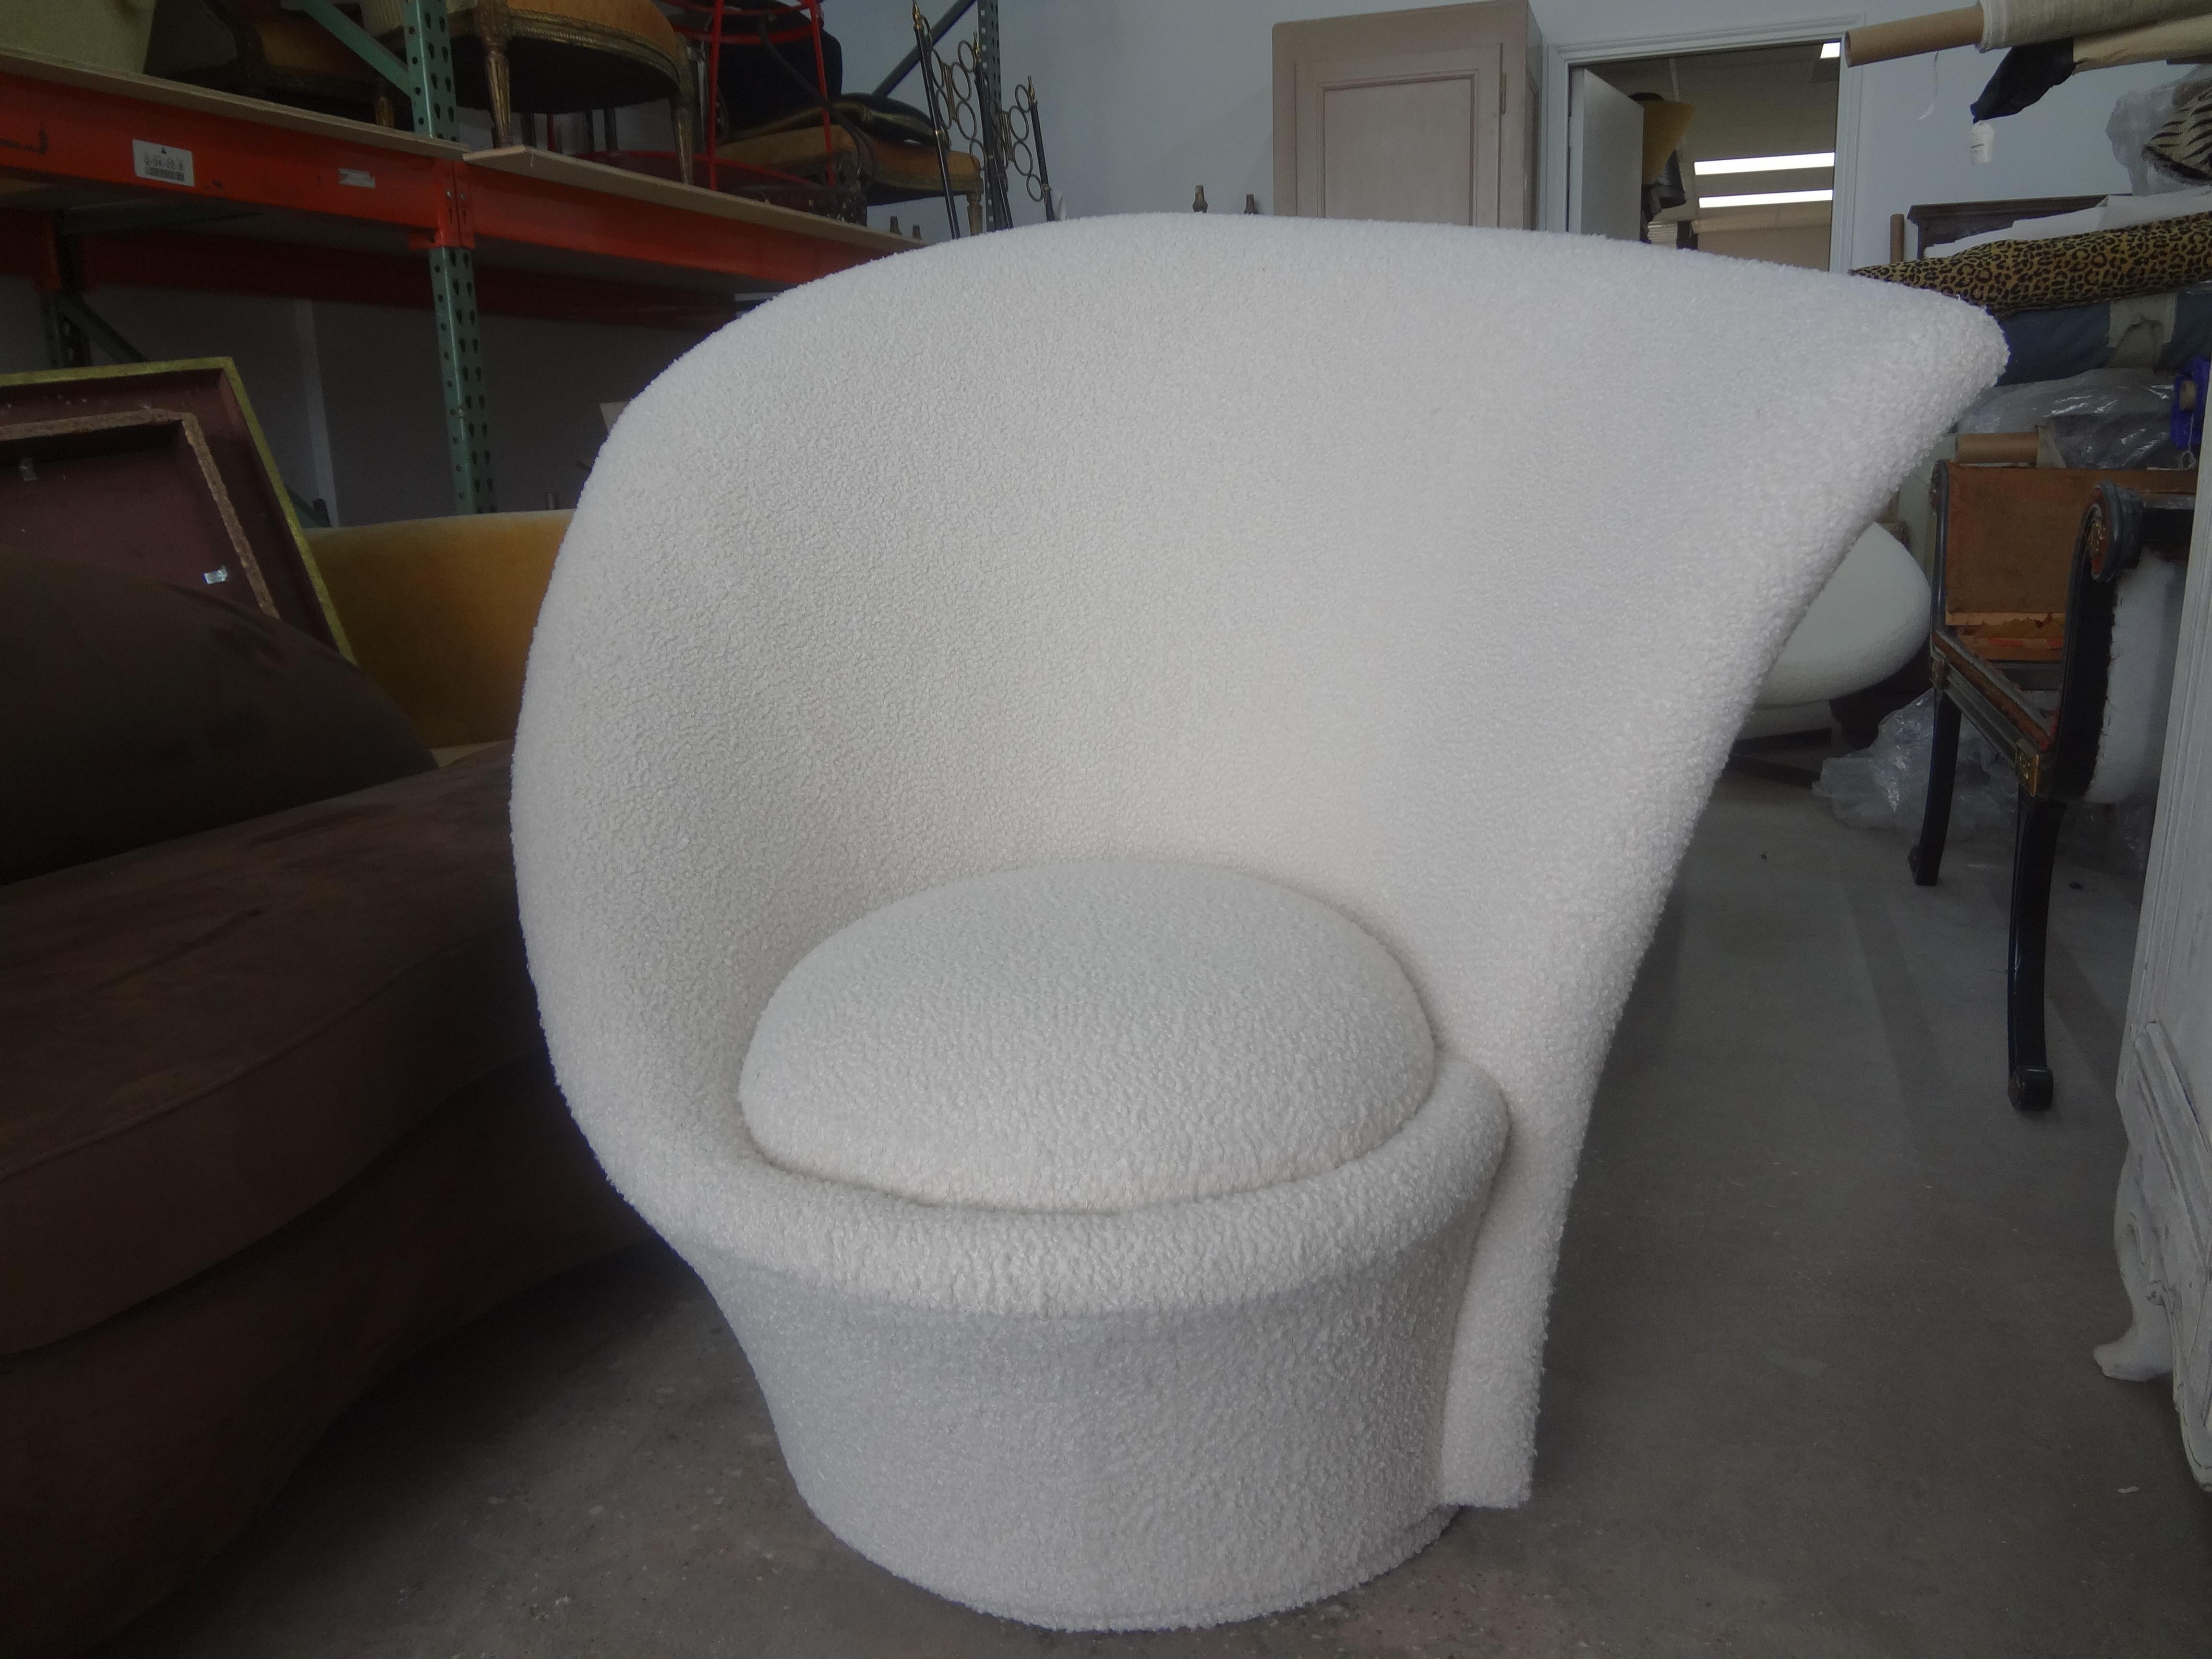 Post Modern Vladimir Kagan for Directional swivel lounge chair. This unusual iconic Kagan swivel chair has a high back and has been professionally upholstered in white boucle fabric. Very comfortable and stunning from every angle!